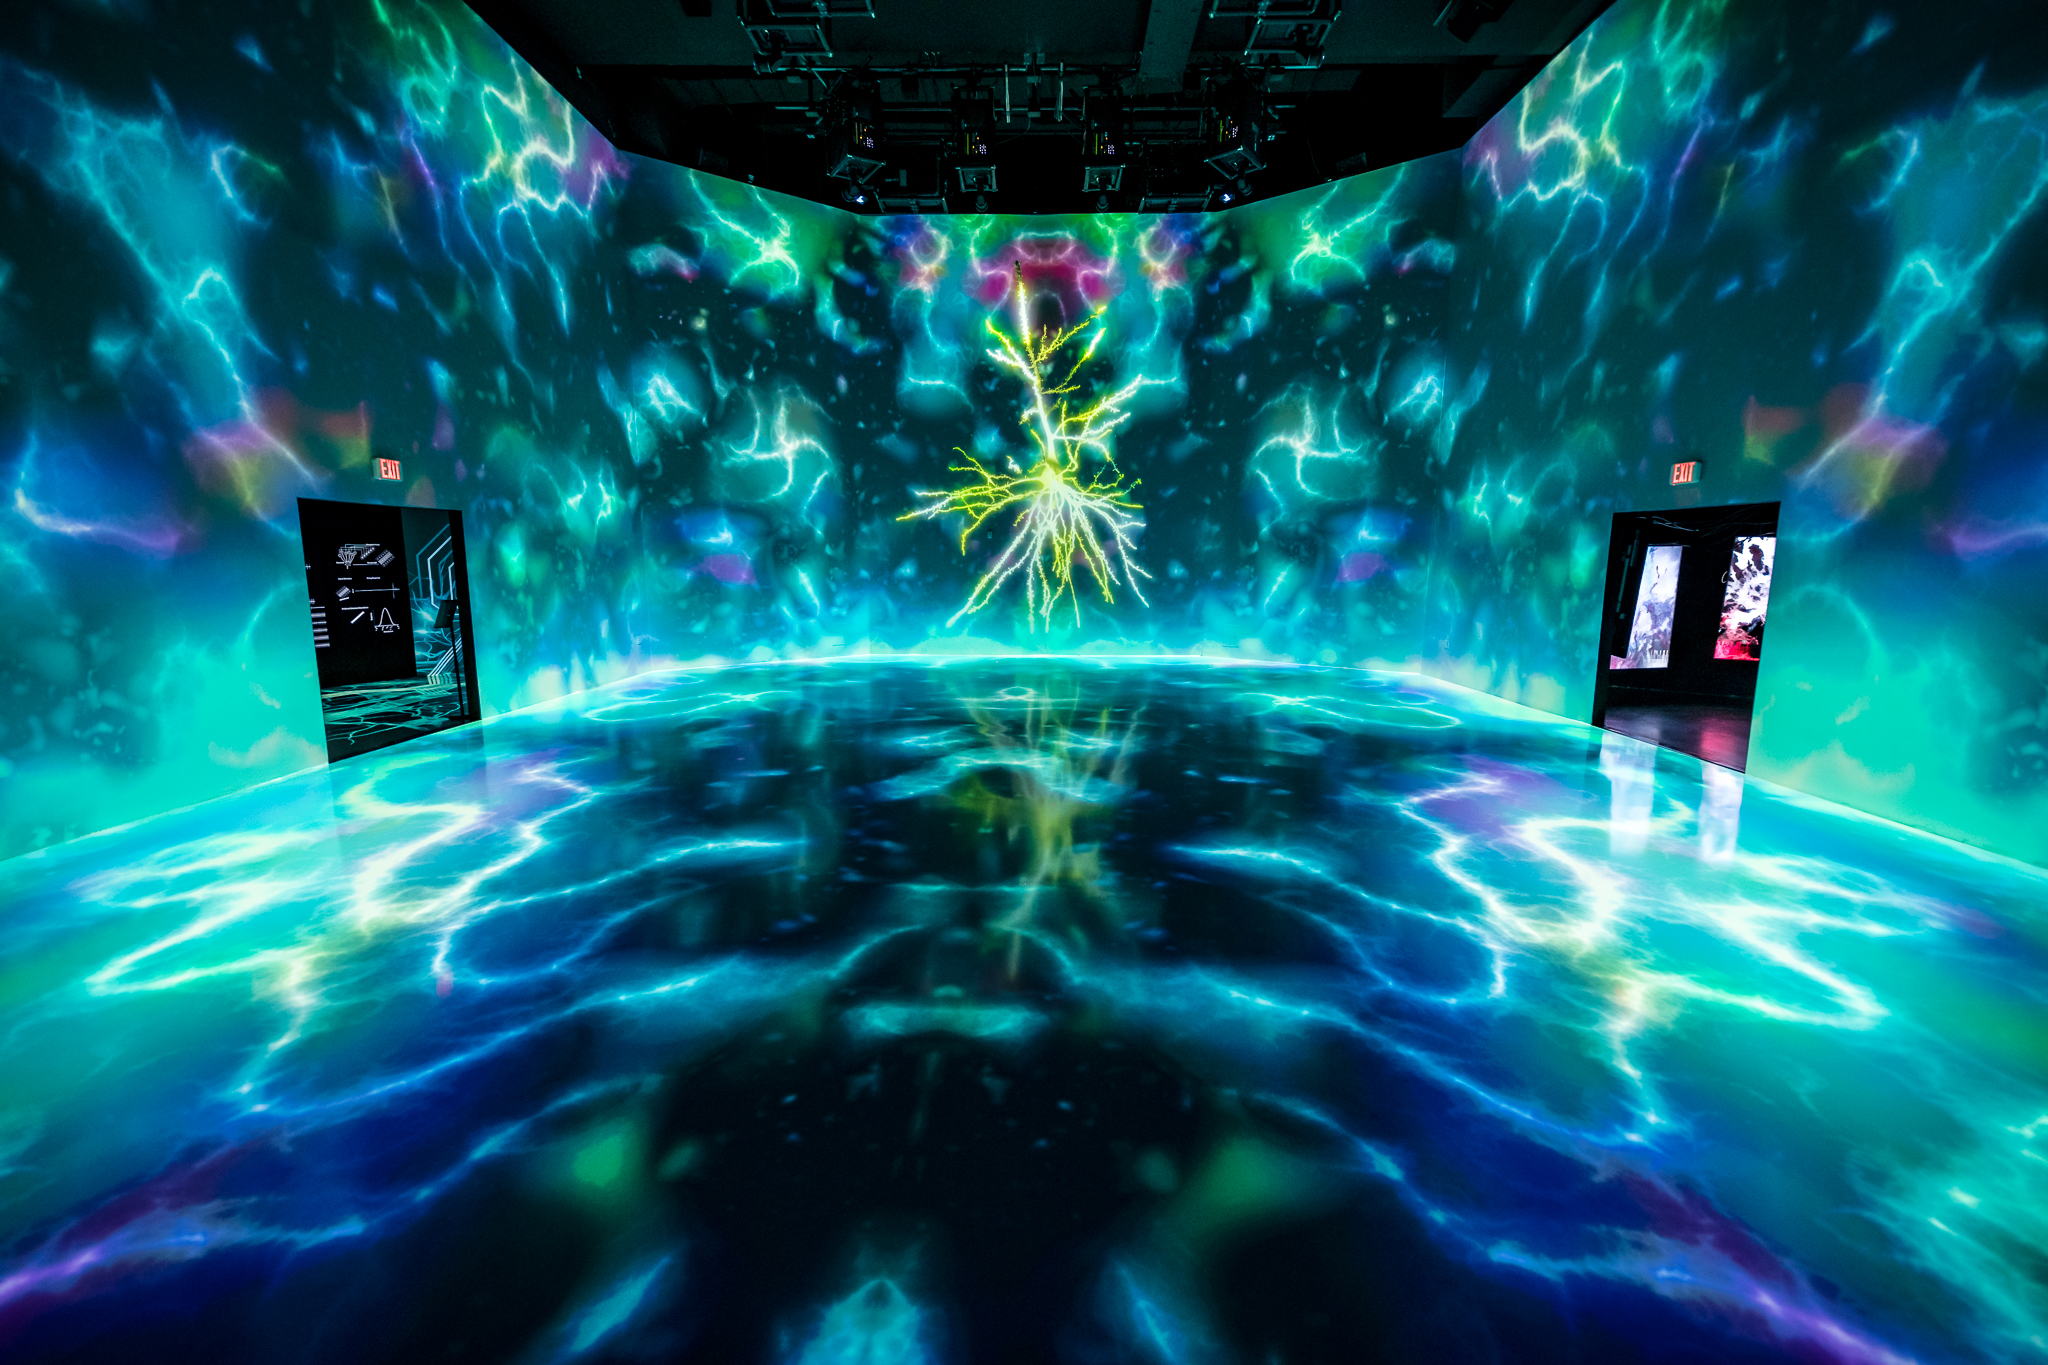 Image of the main exhibit of the SfN ARTECHOUSE collaboration in Washington D.C.